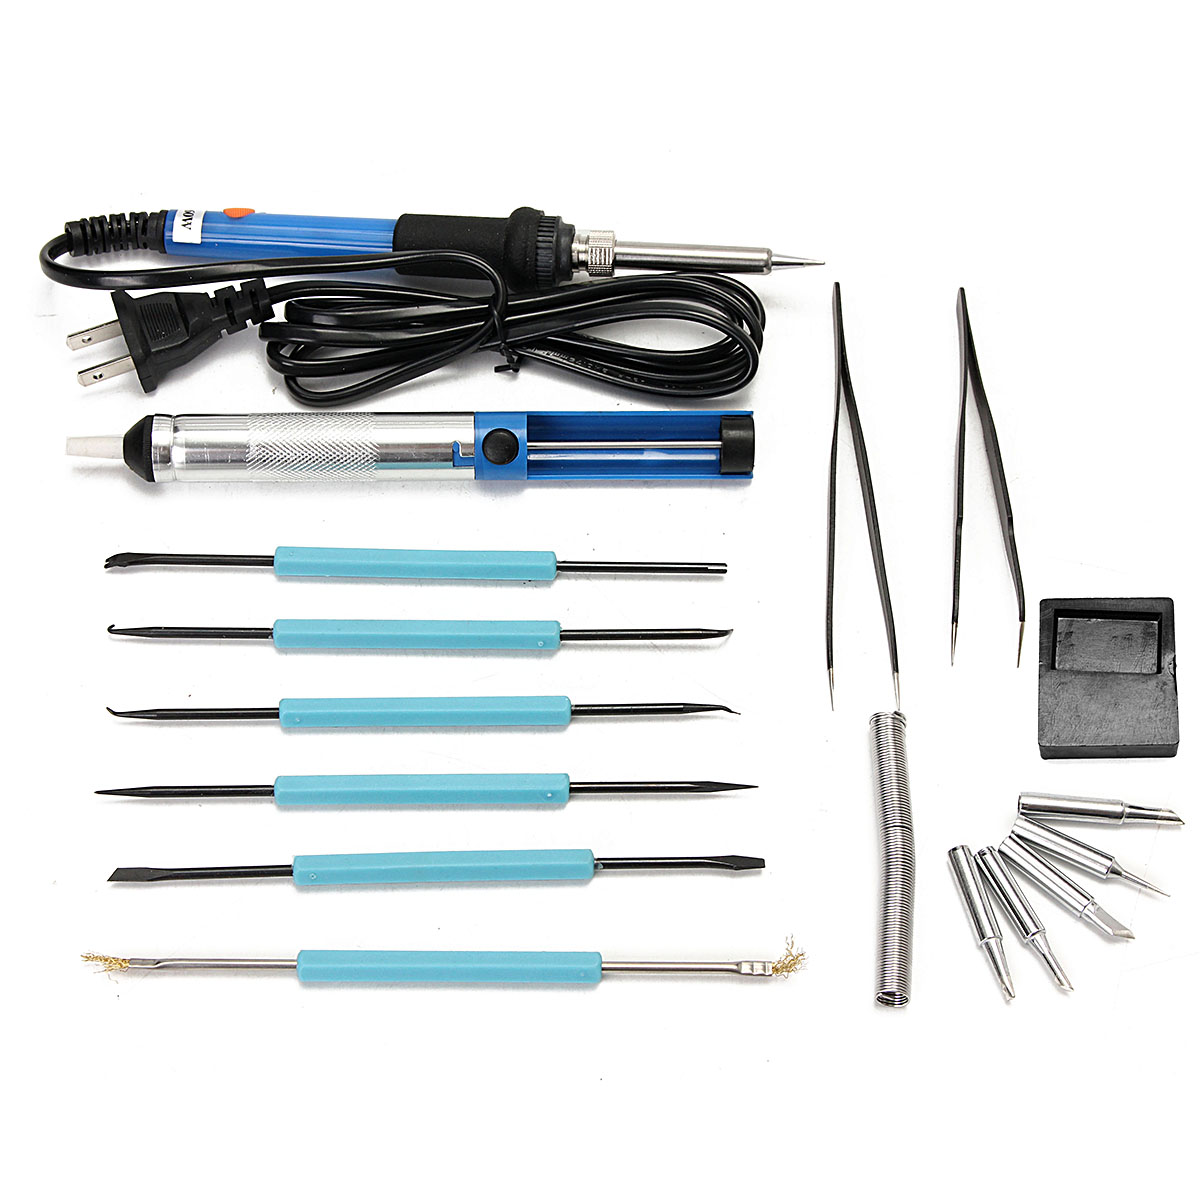 Adjustable-Electric-Temperature-Welding-Soldering-Iron-Tools-Kit-60W-110V-1300320-2